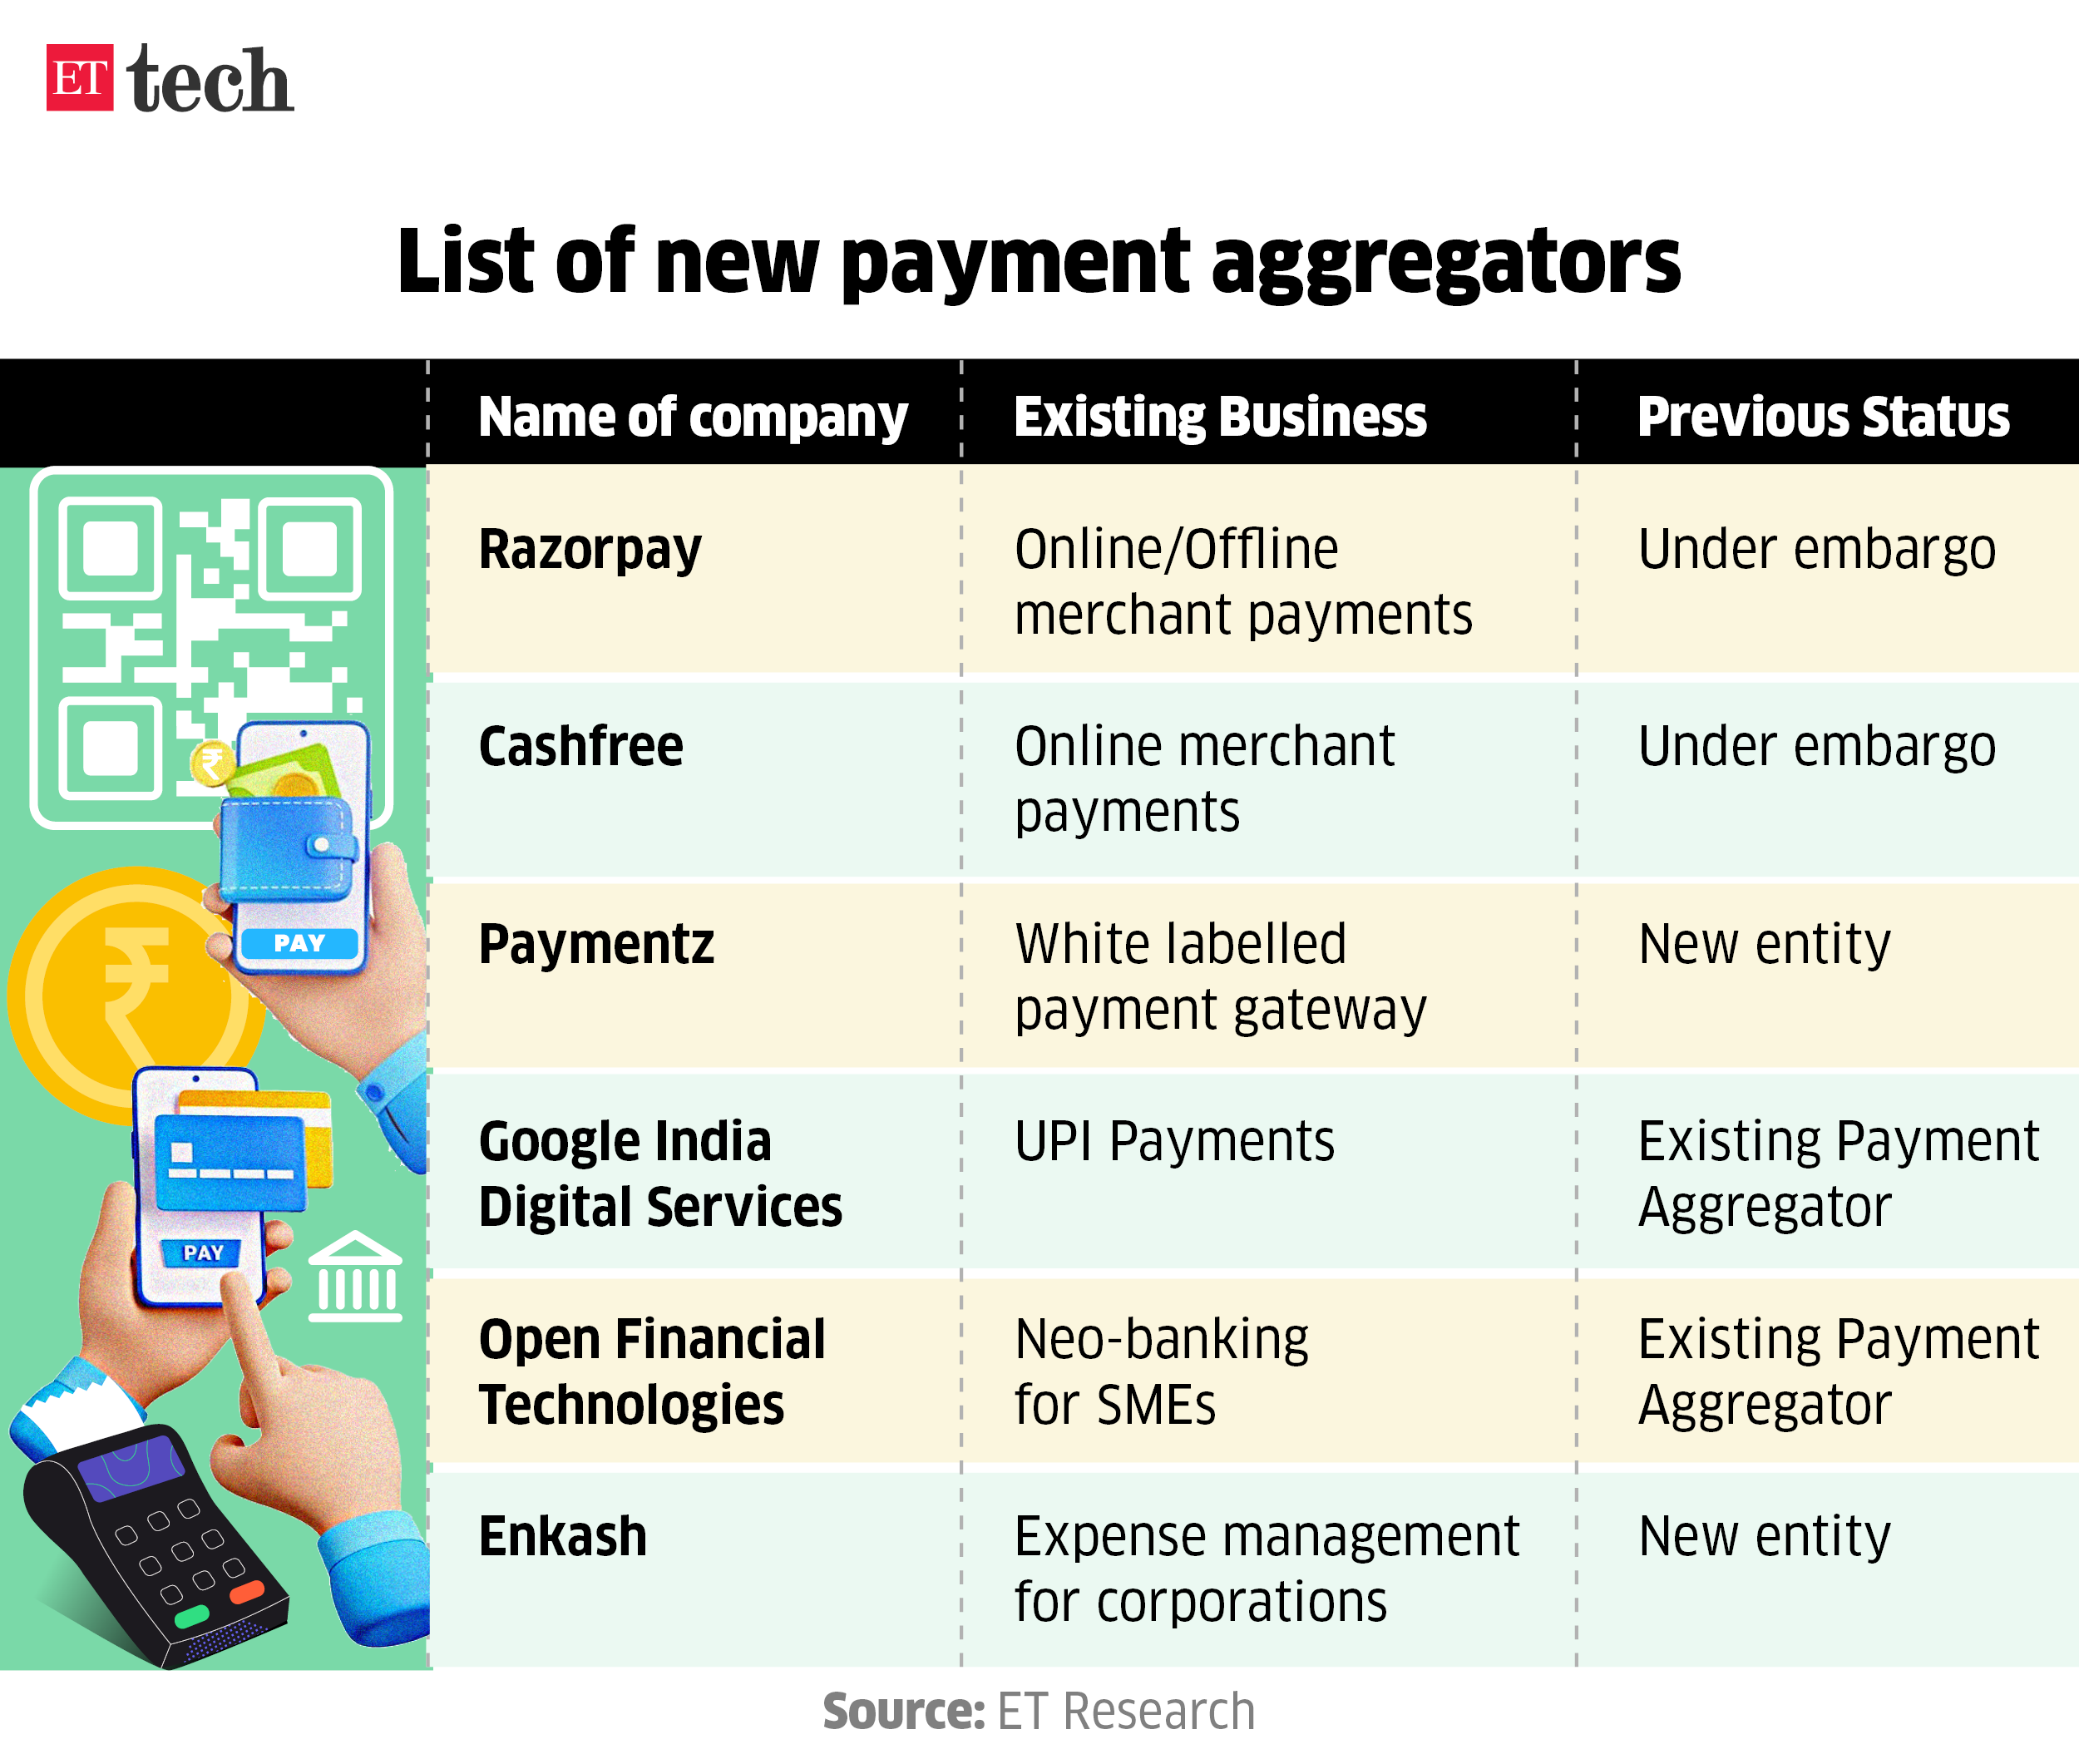 List of new payment aggregators